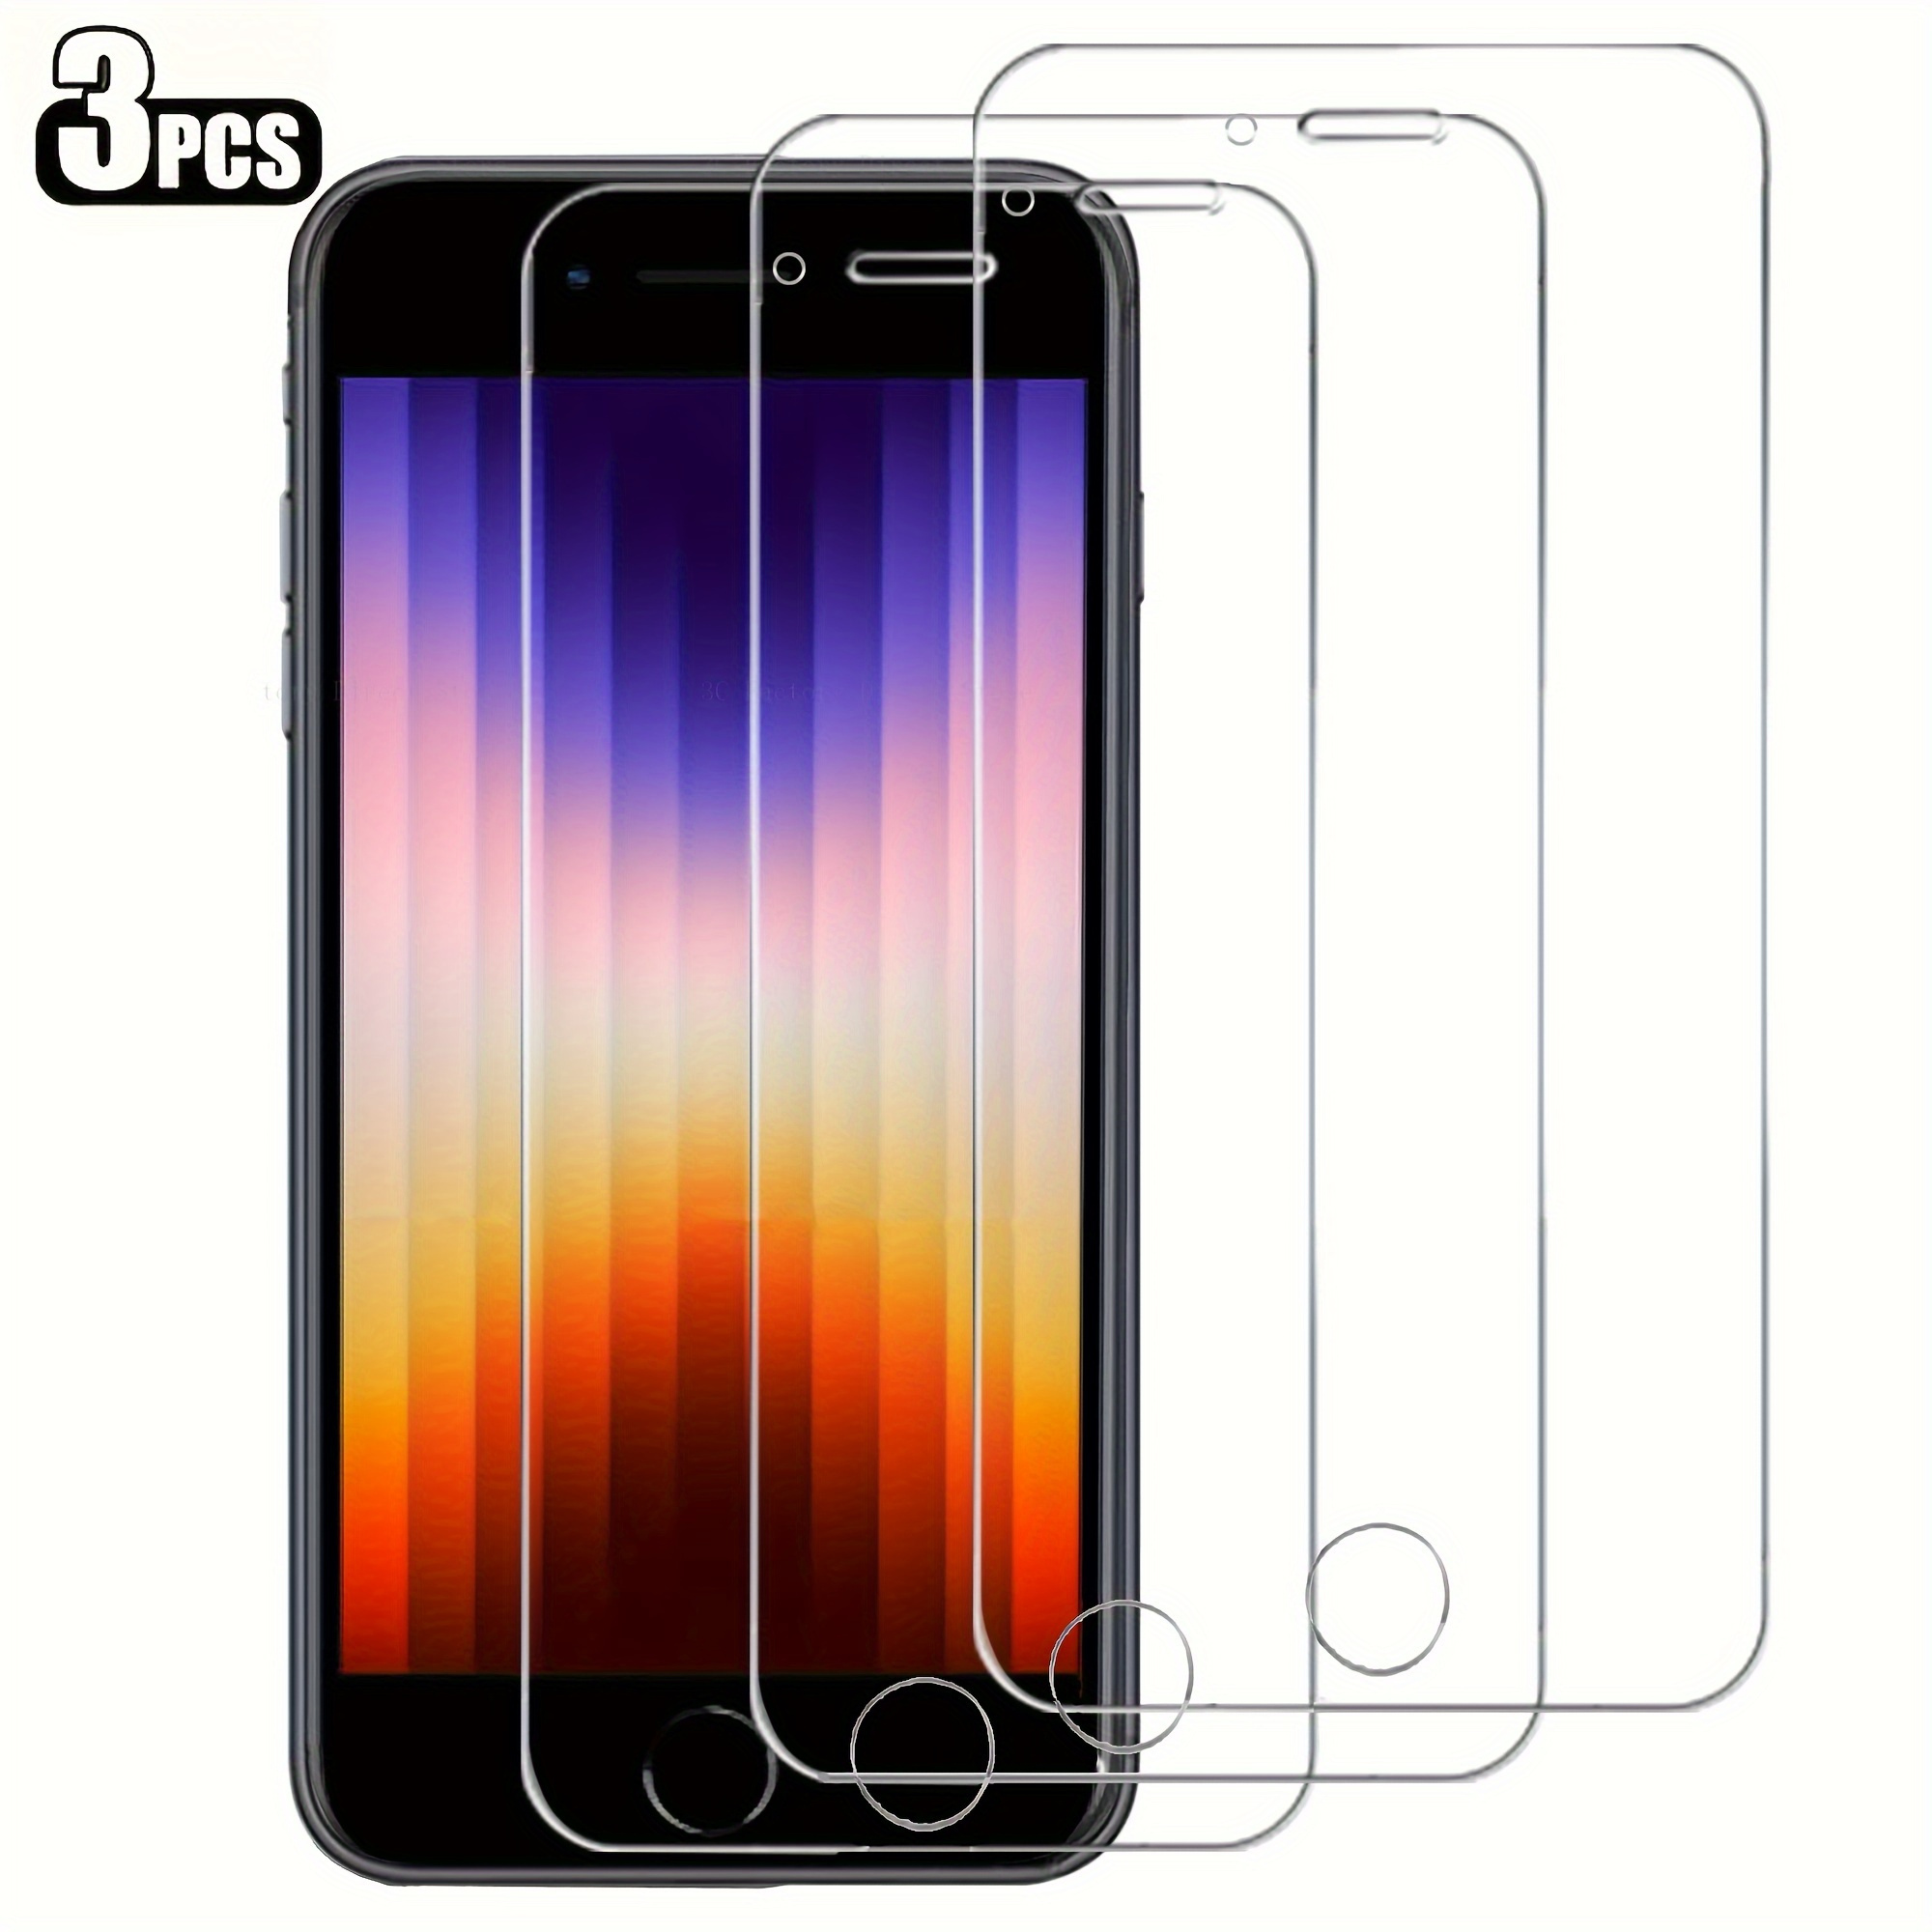 

3pcs Shatterproof Tempered Glass Screen Protector For Se 2022/se 2020, For 8/7/6 - 99.99% Hd Clear, Easy Install, 9h Hardness, Bubble-free, Fits 4.7